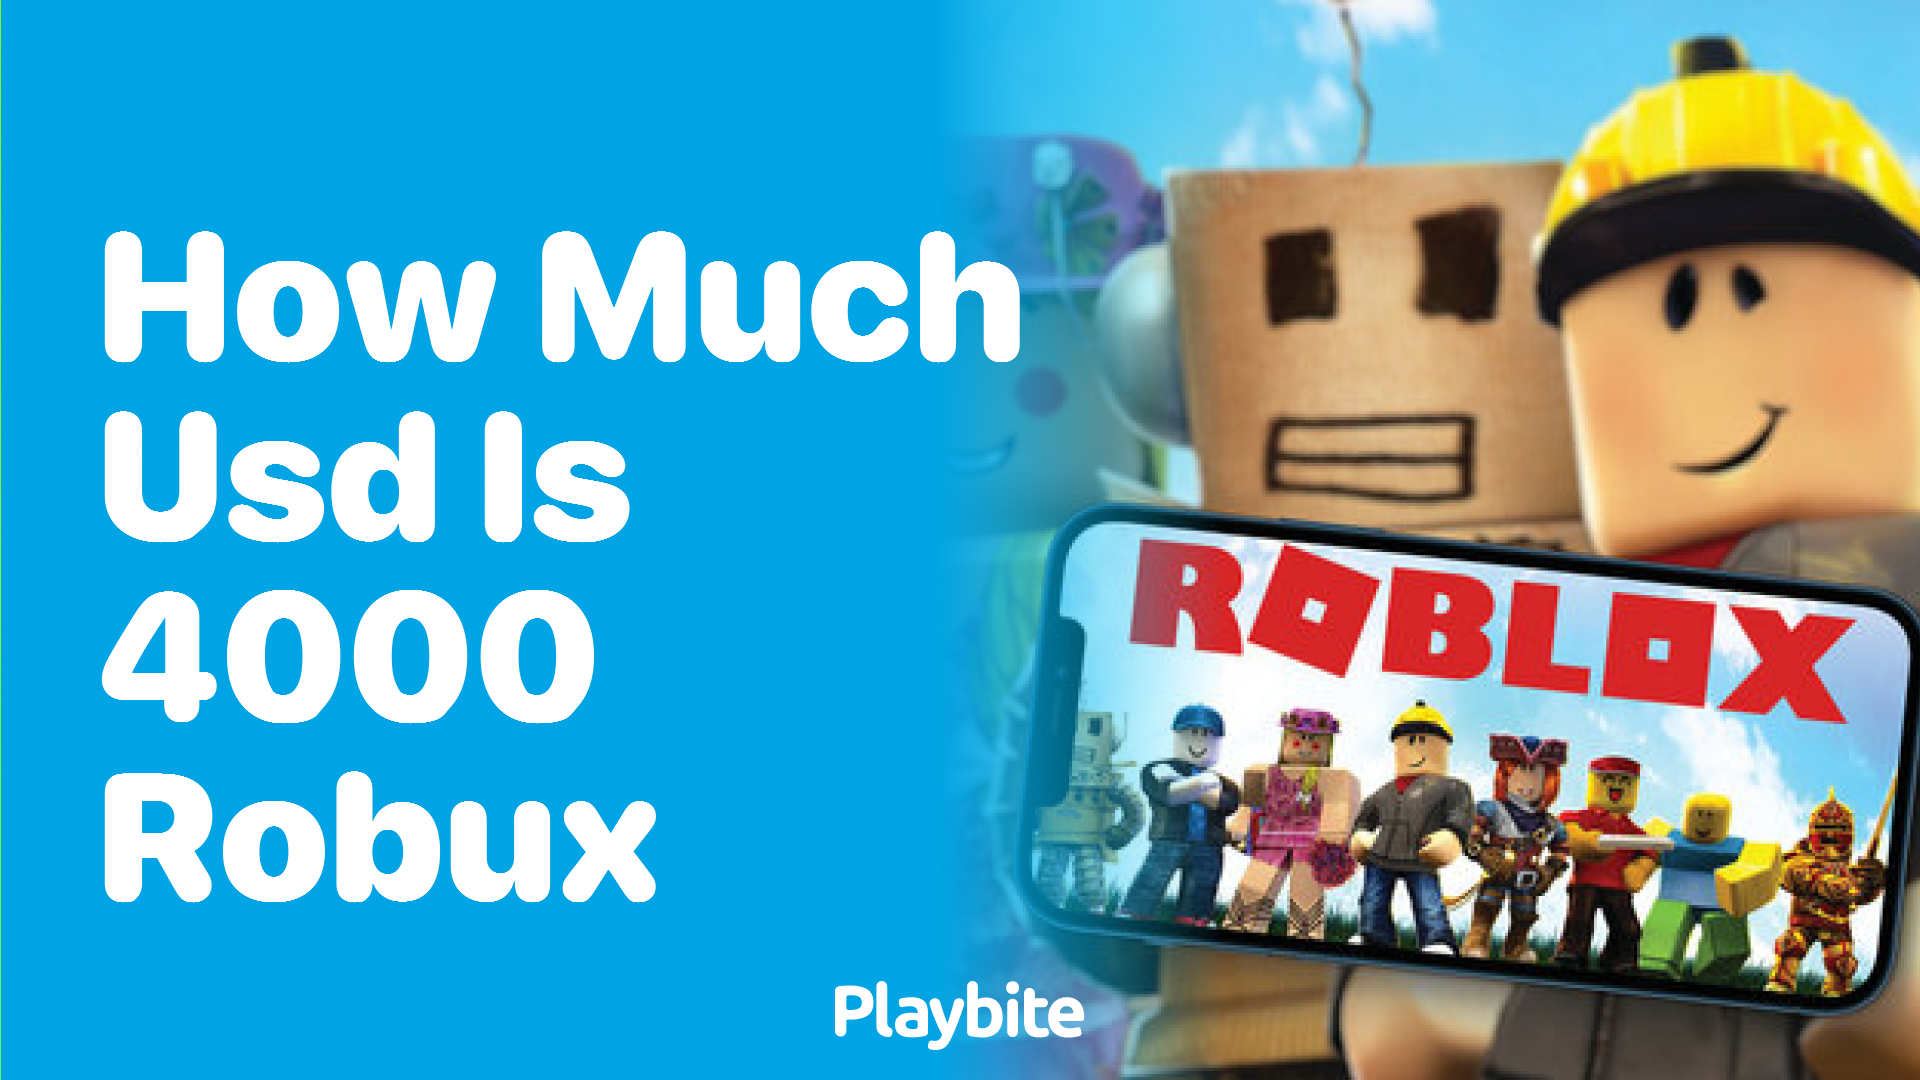 How Much USD is 4000 Robux?